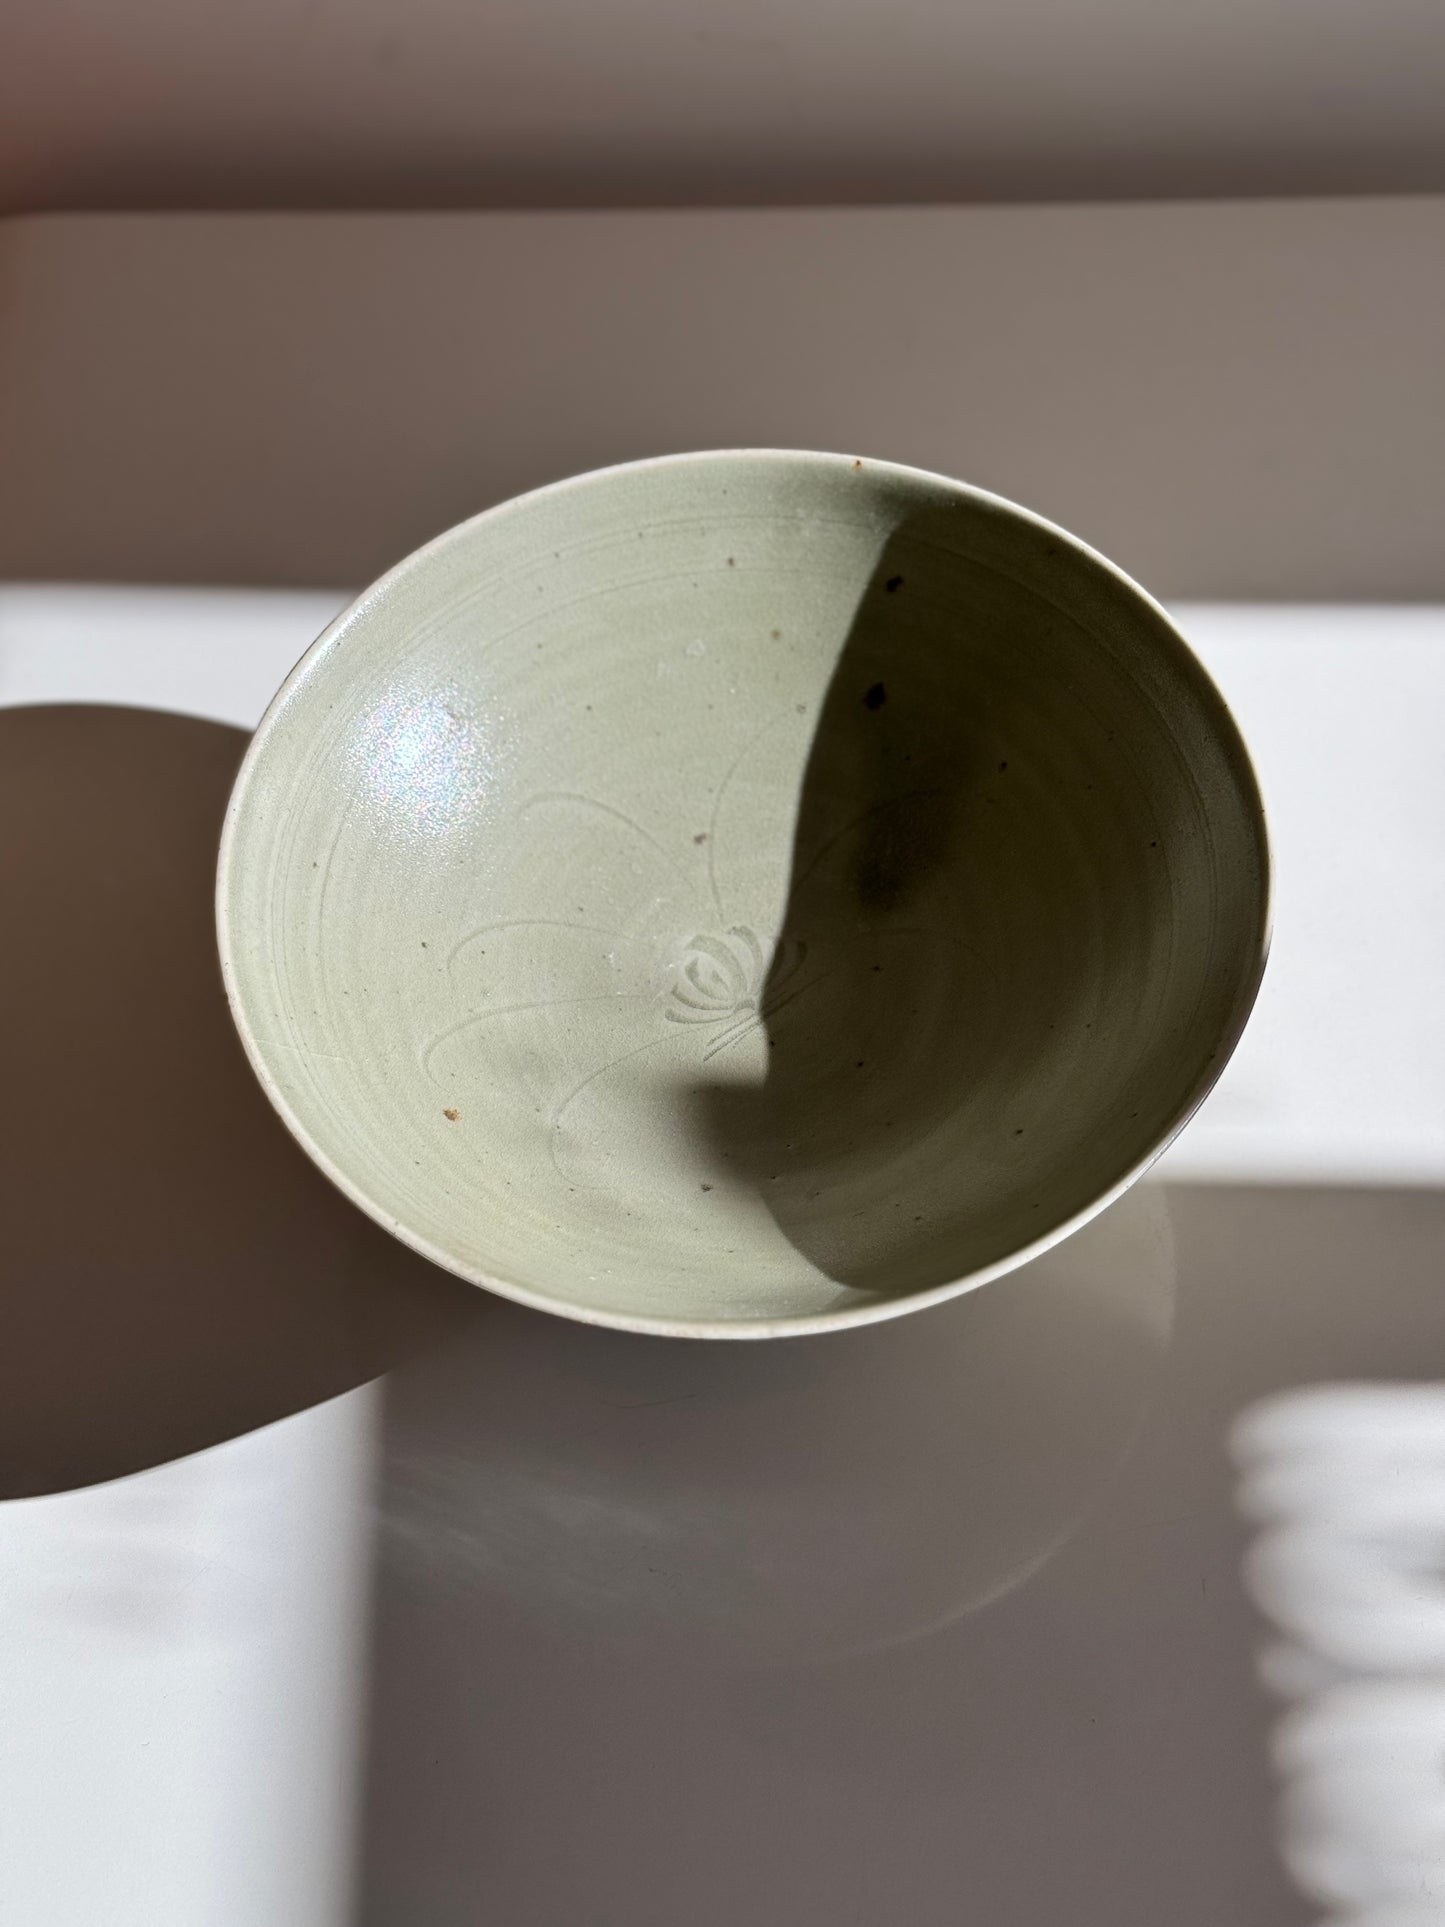 Celadon Footed Bowl